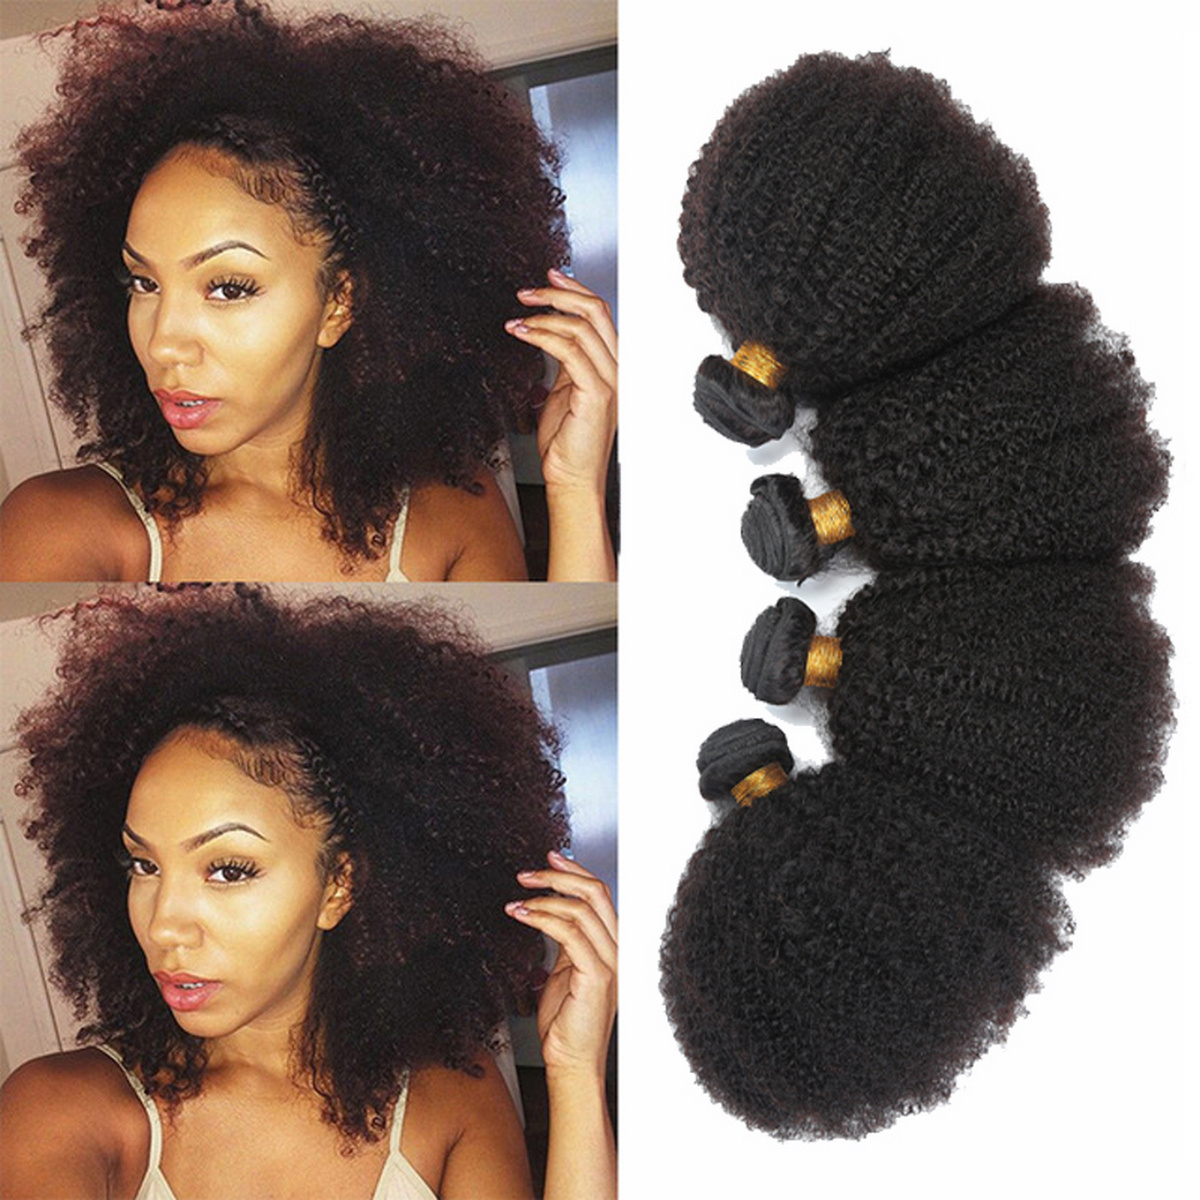 Afro Kinky Curly Weave Hairstyles